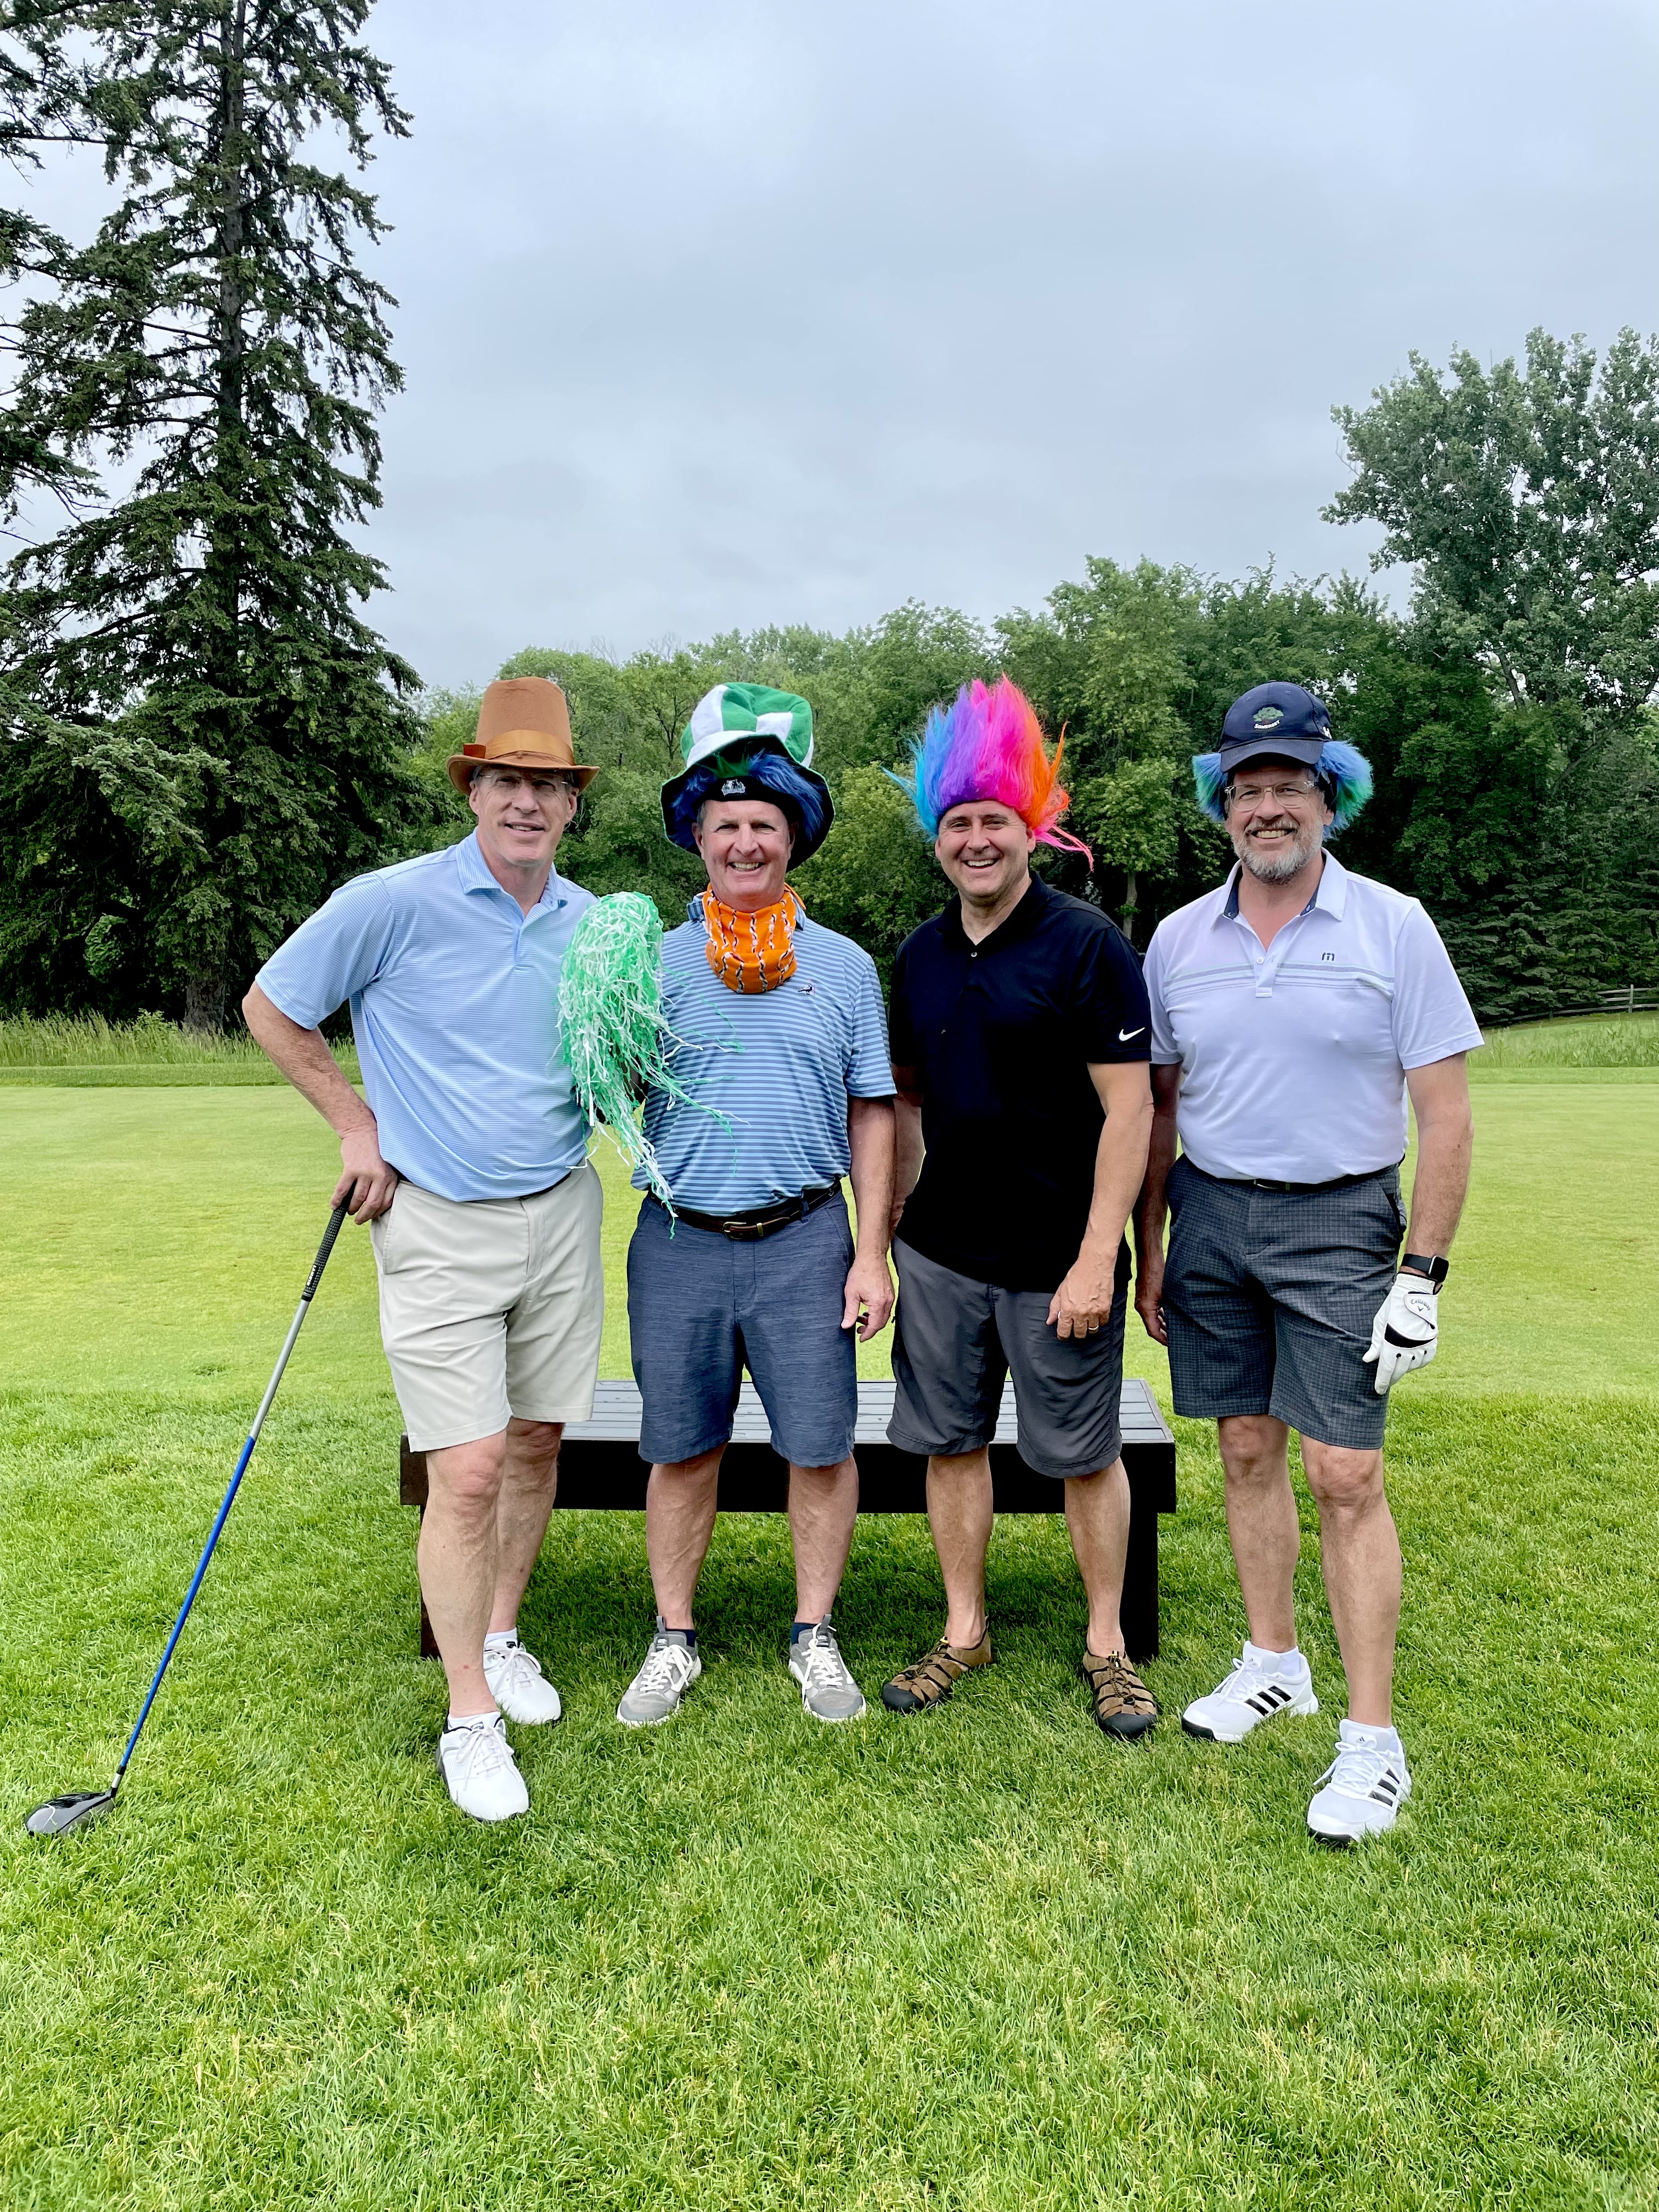 A group of four golfers pose for a photo while wearing wacky costumes and wigs on a golf course.